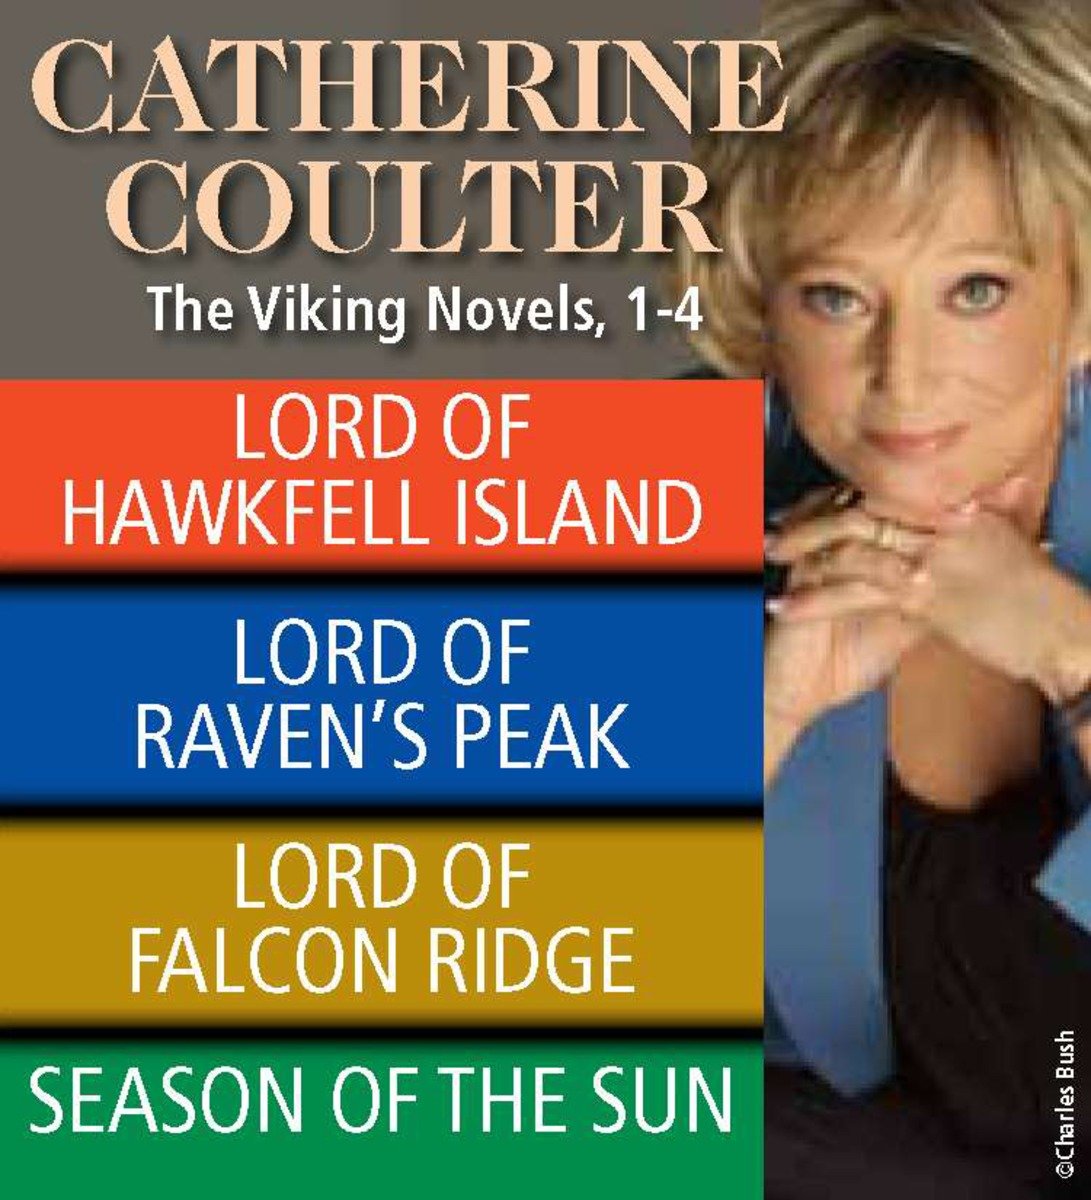 Umschlagbild für Catherine Coulter: The Viking Novels 1-4 [electronic resource] :